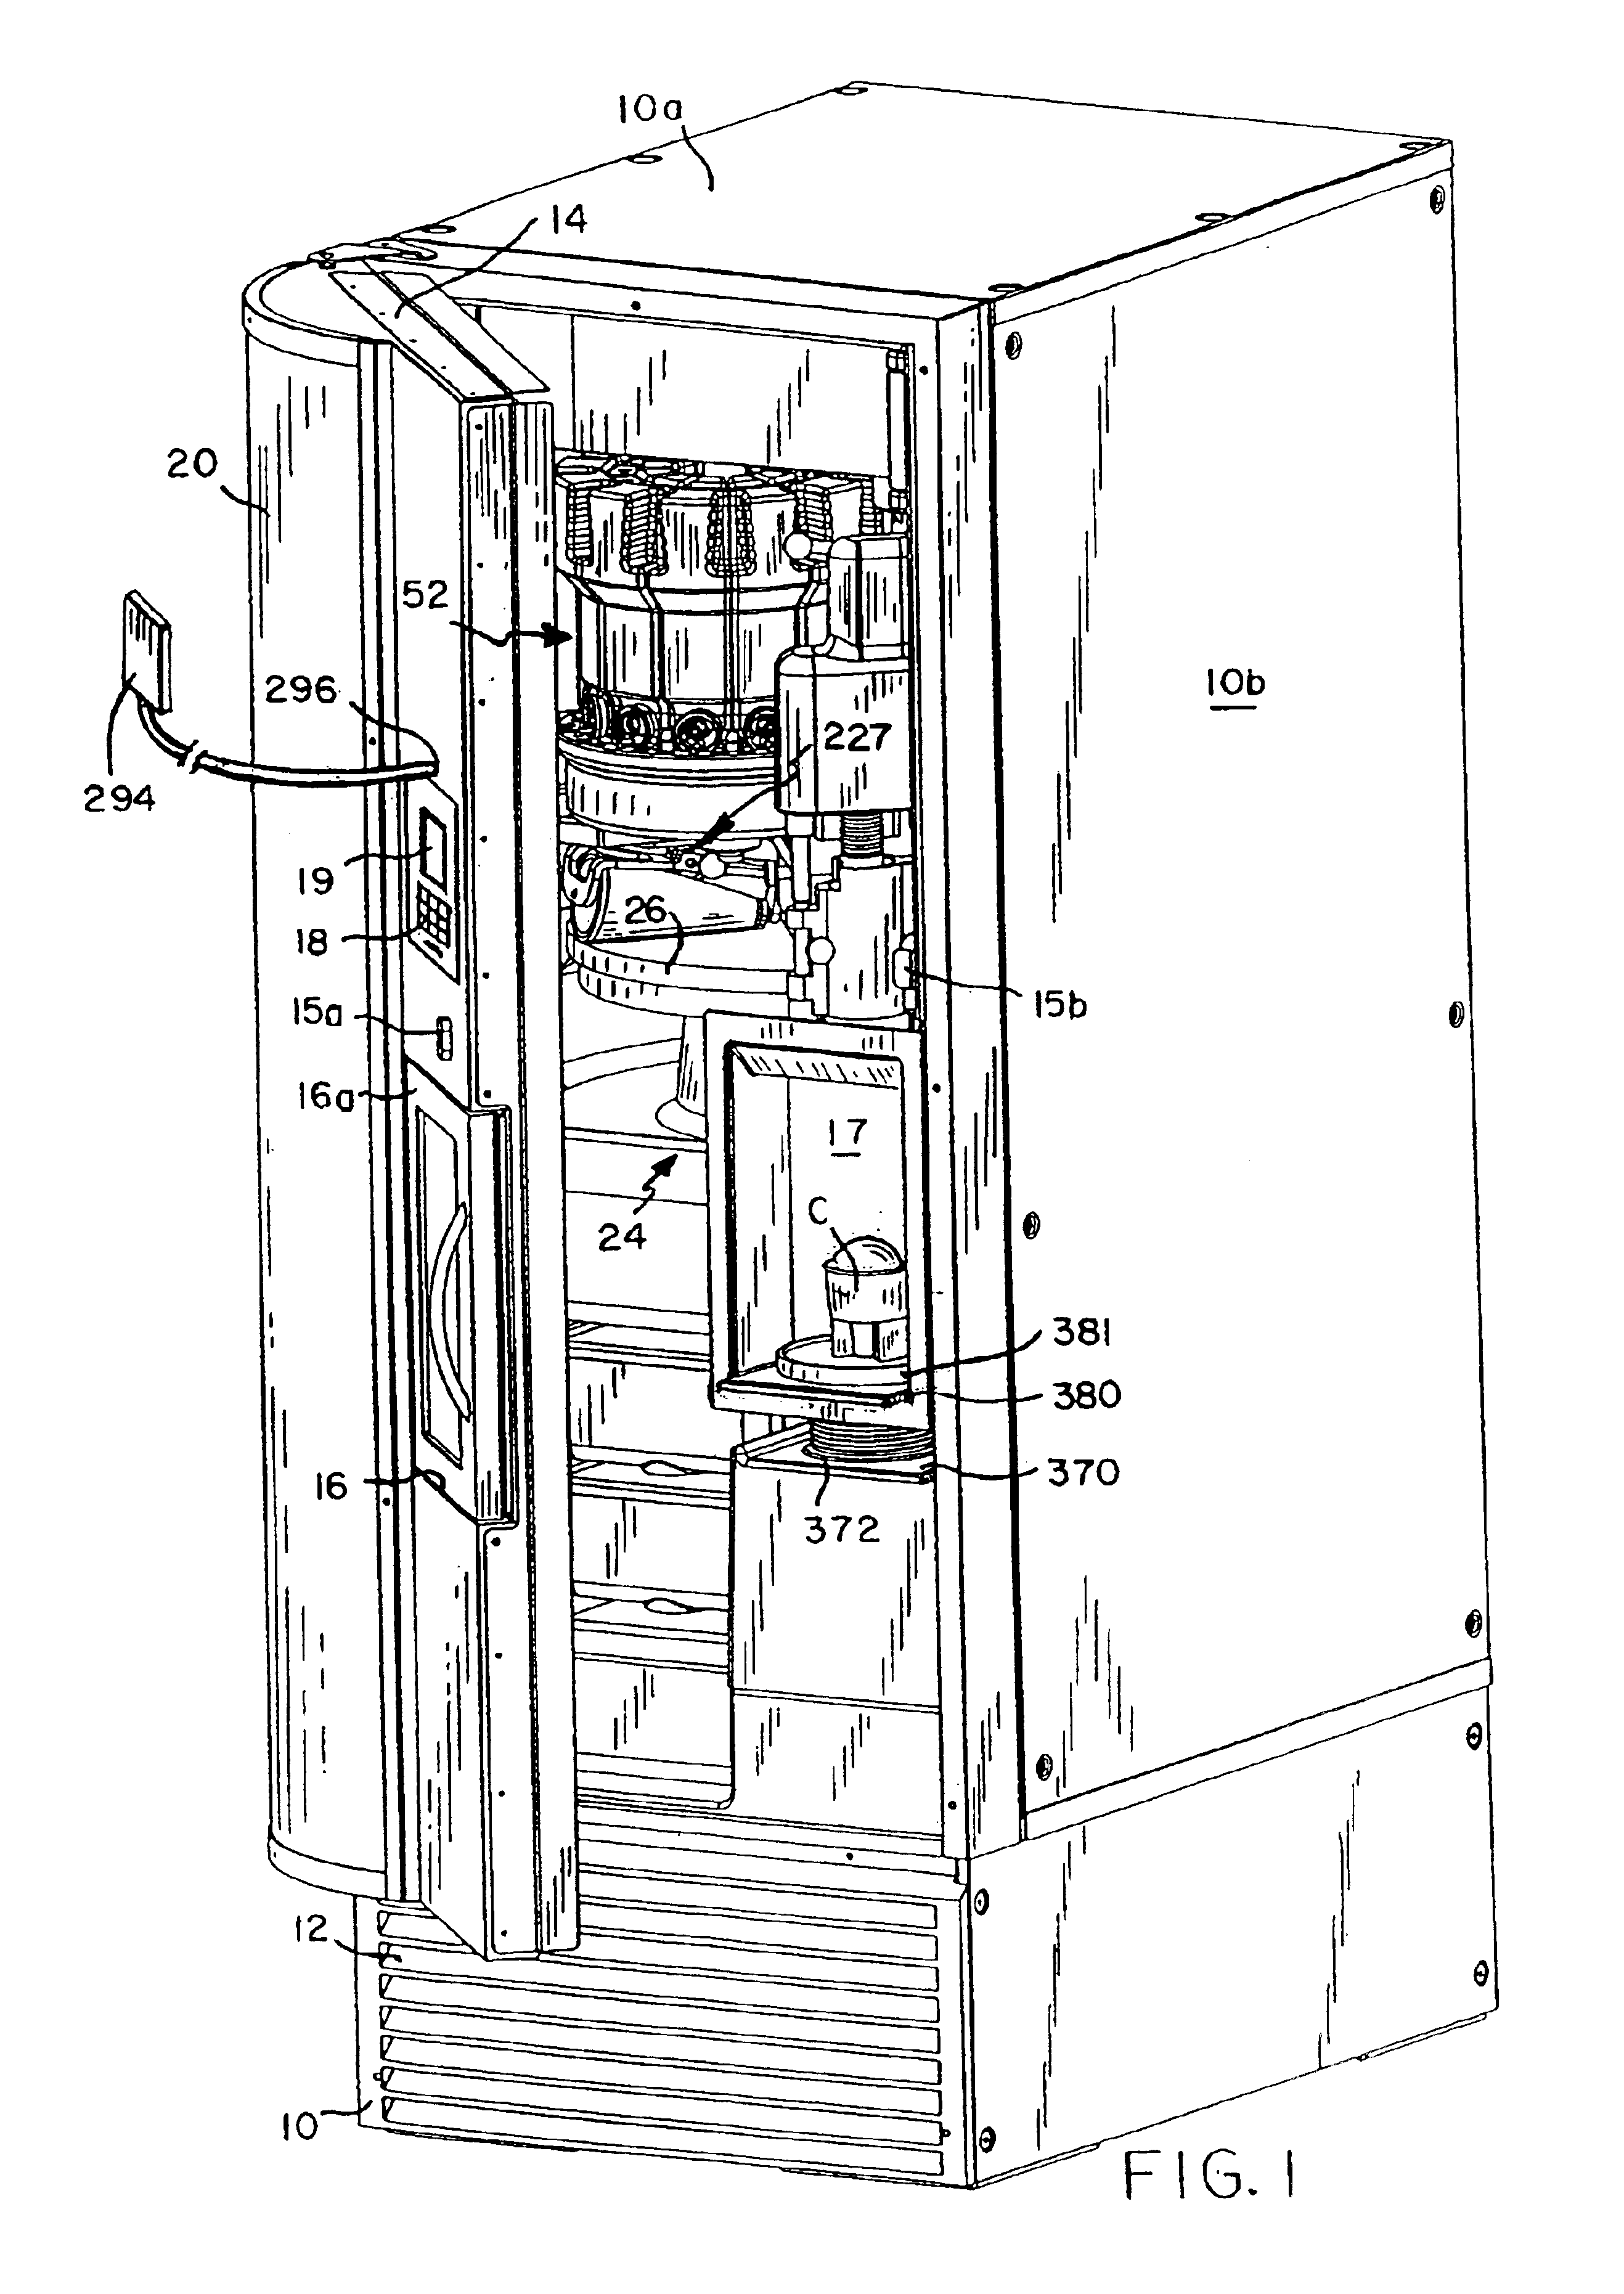 Method for producing and dispensing an aerated and/or blended food product